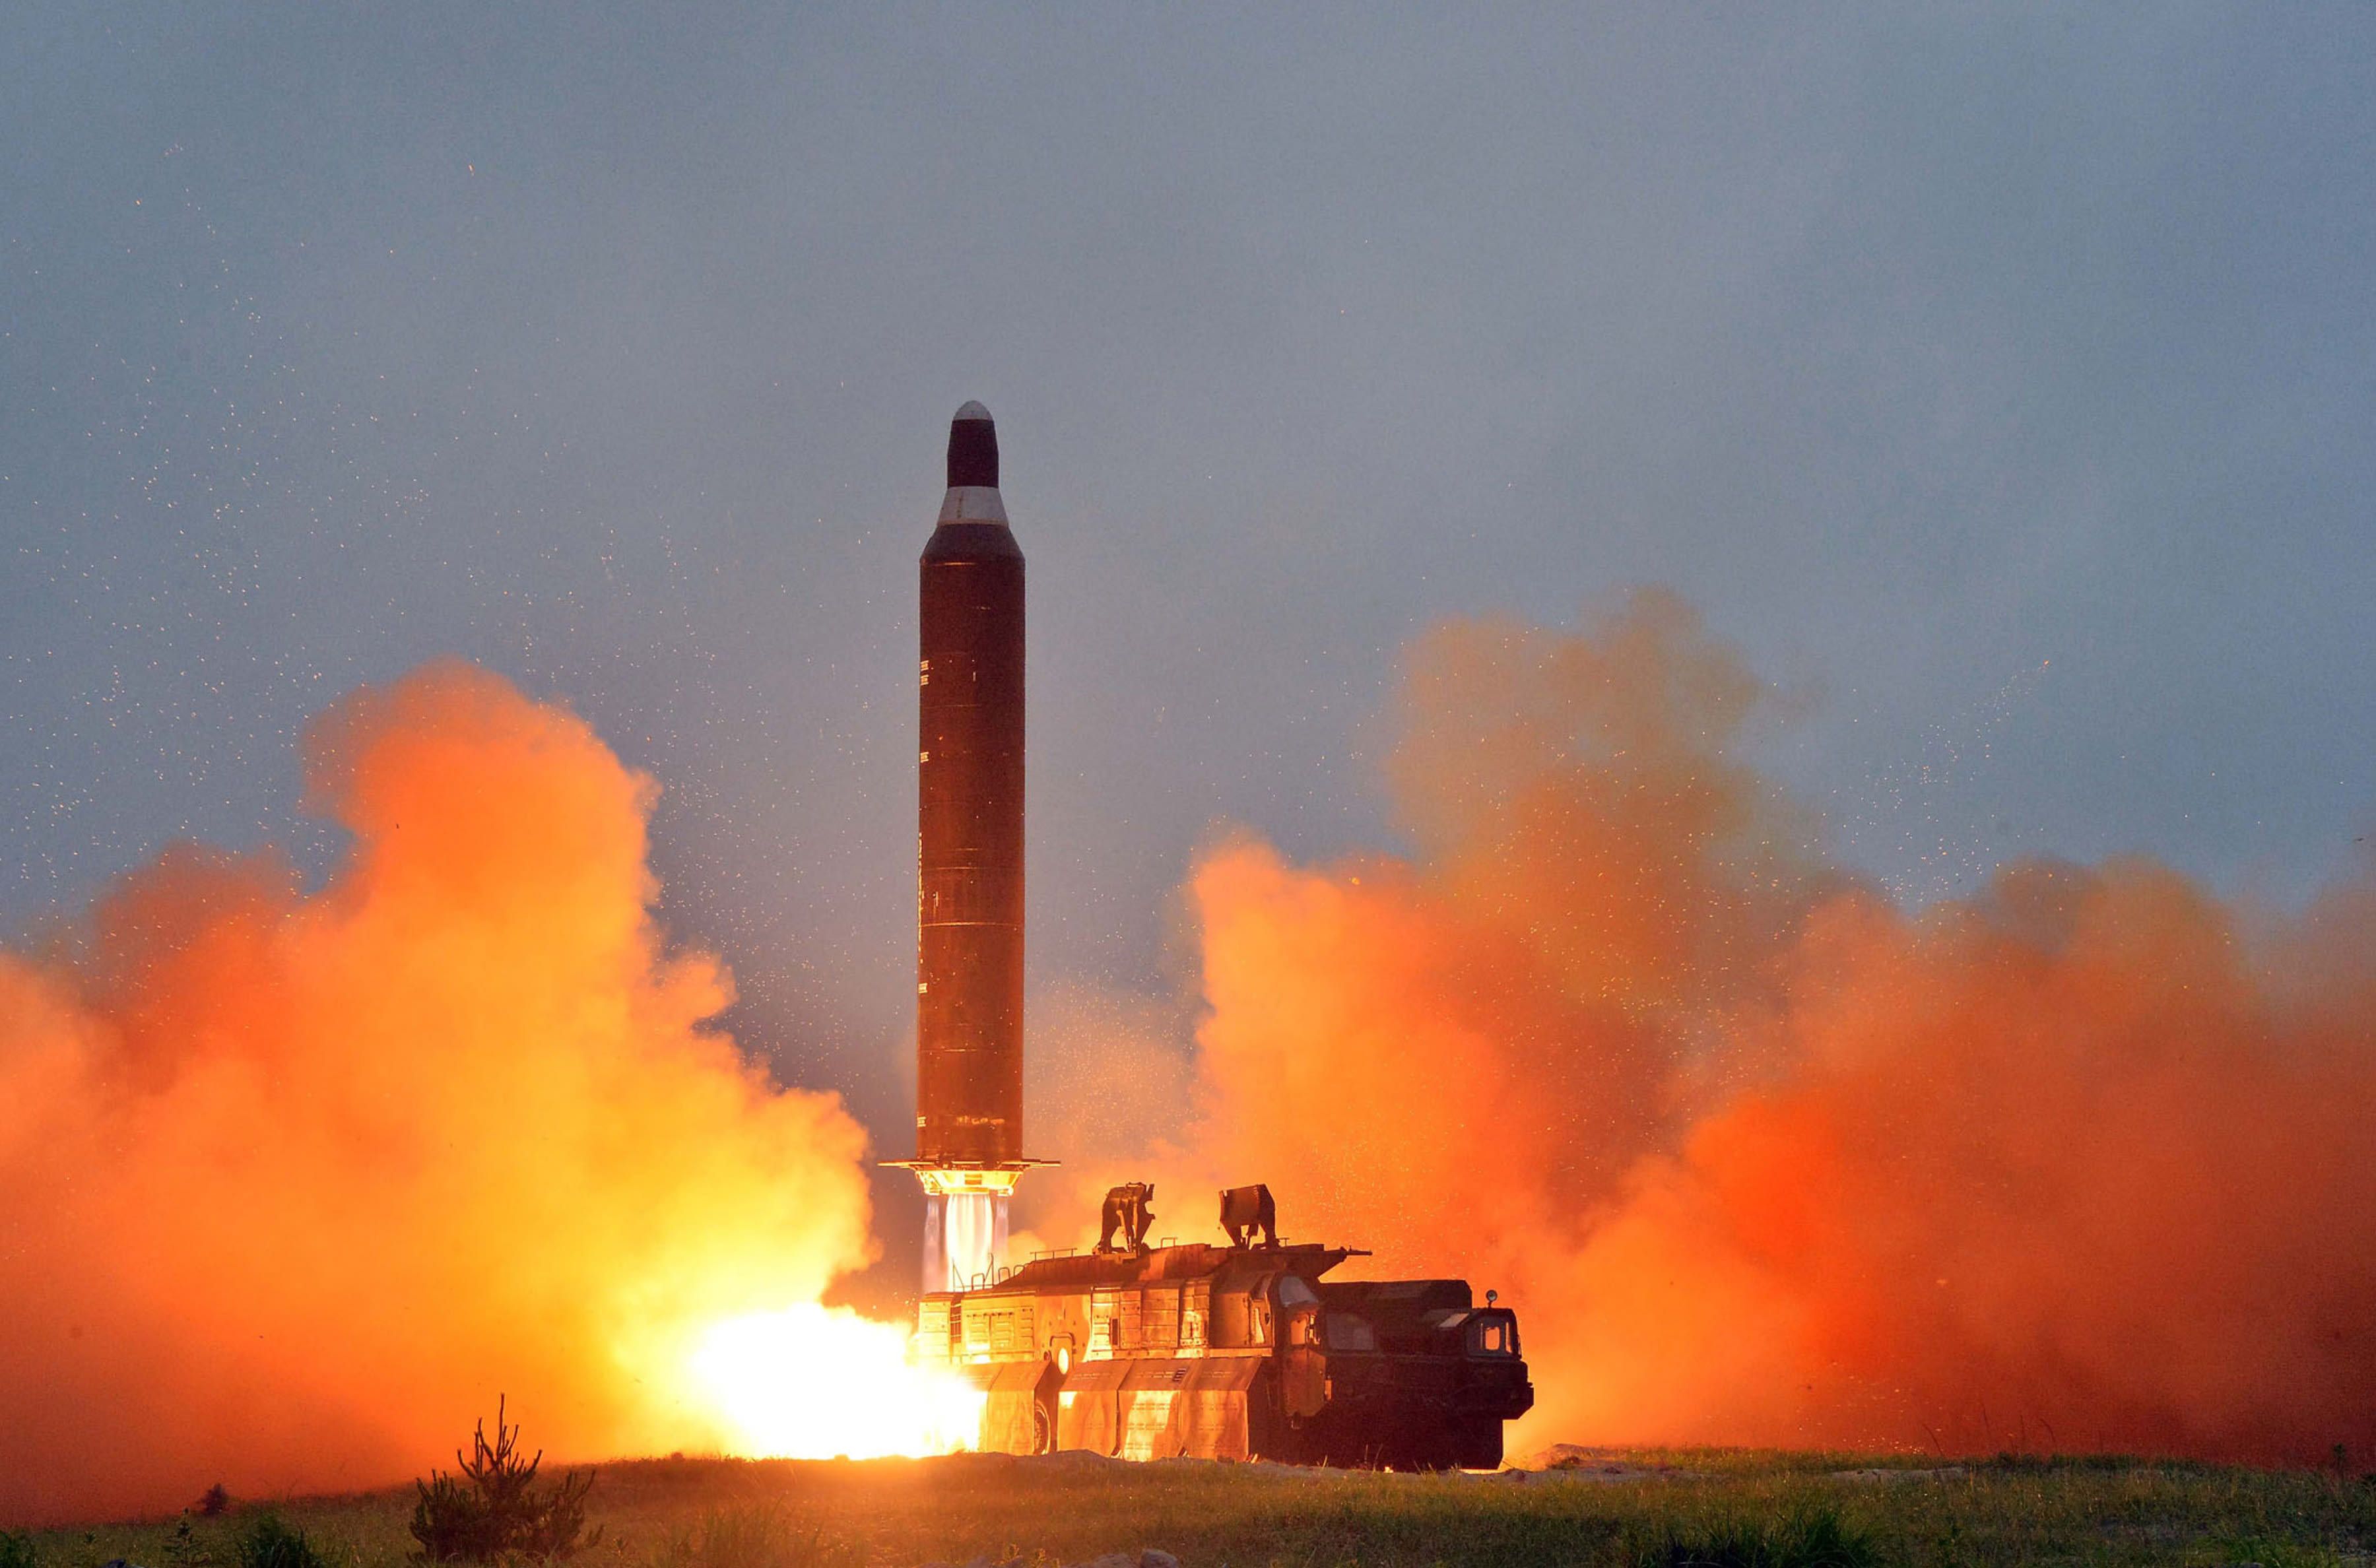 New image show how North Korea is expanding its missile research